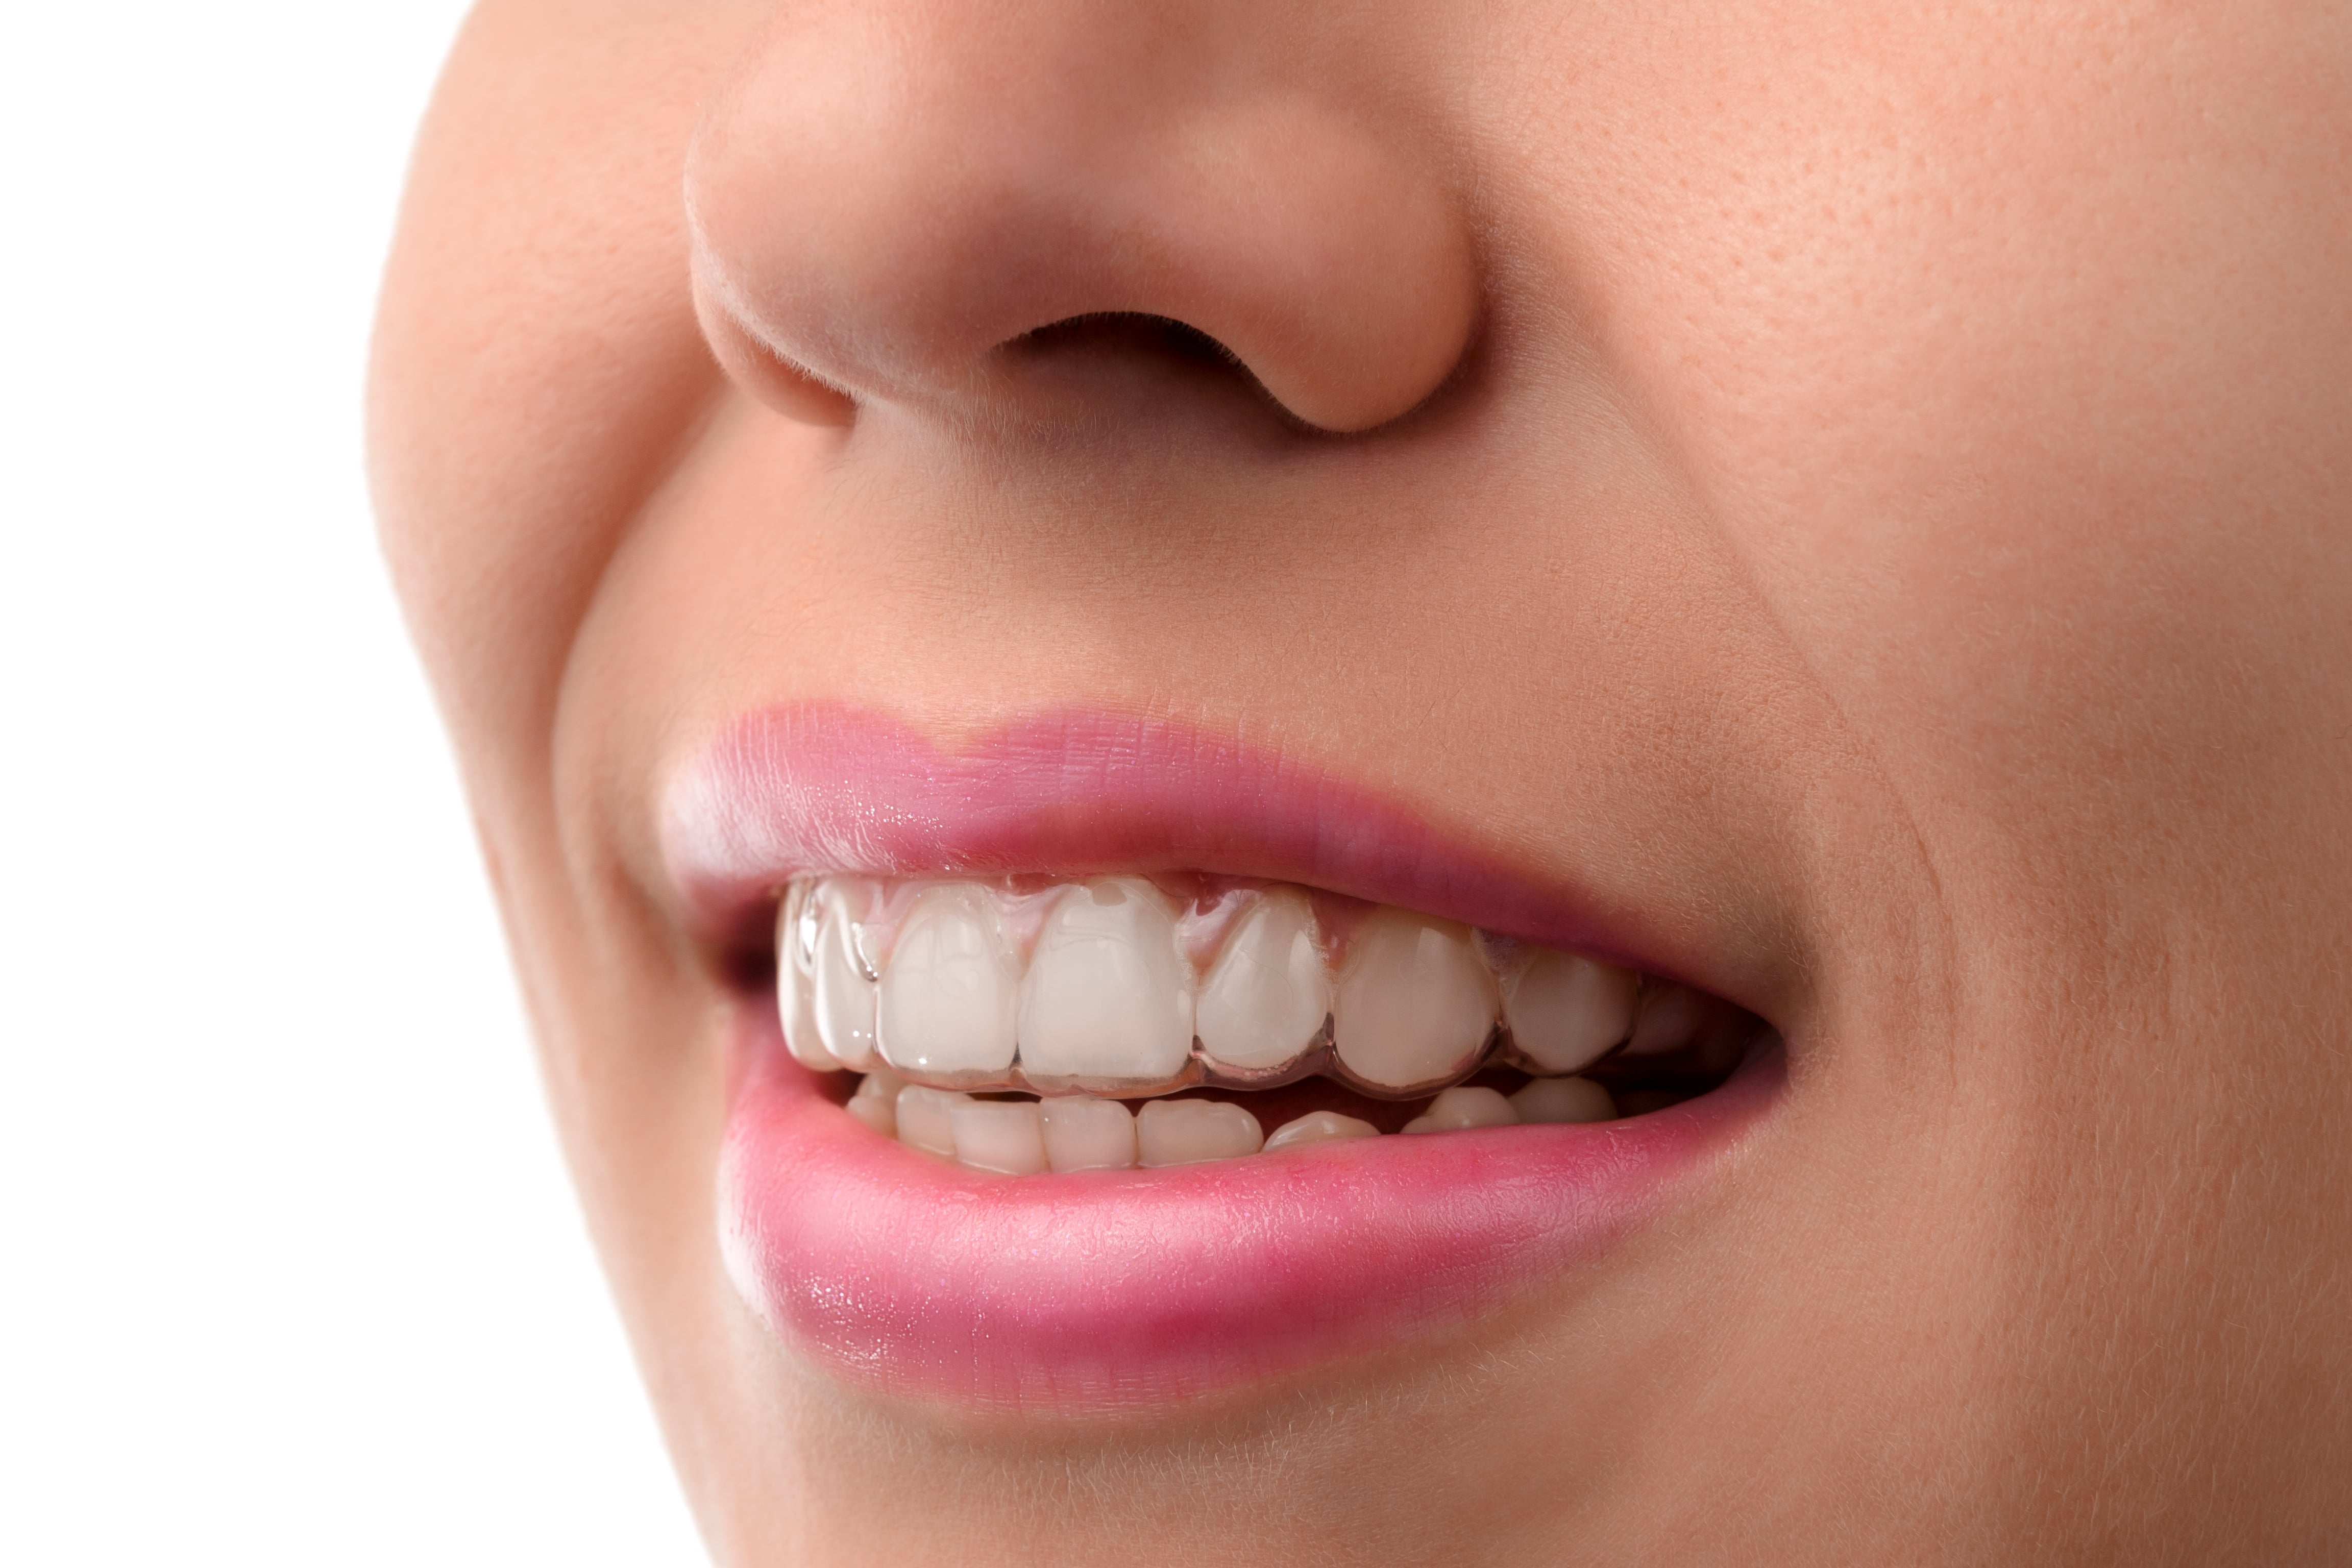 Invisalign Invisible Braces - Best Clear Invisible Aligners